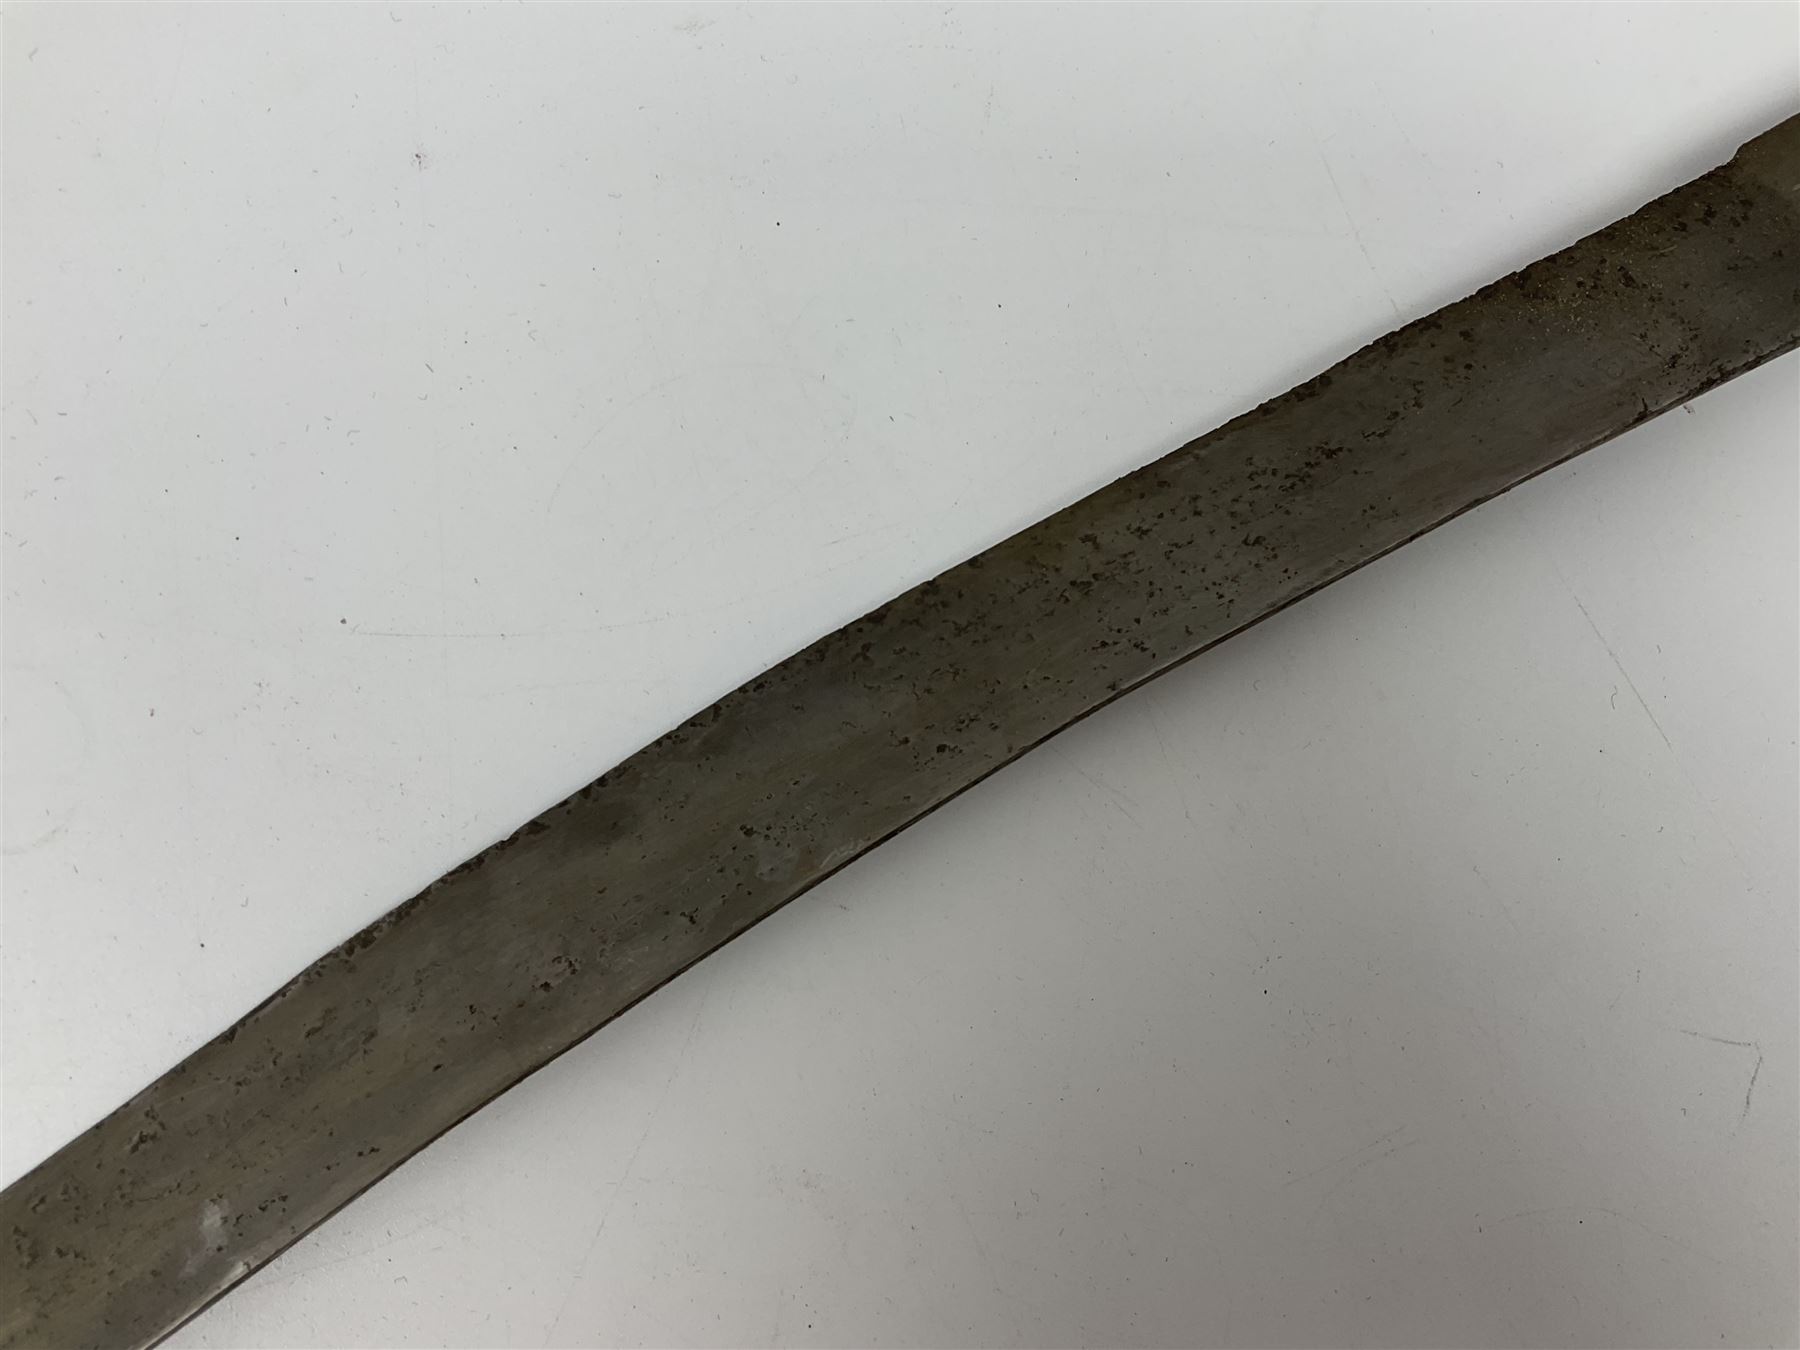 Late Victorian British Military gymnasium practice sword with 85.5cm fullered blunt pointed narrow s - Image 37 of 44